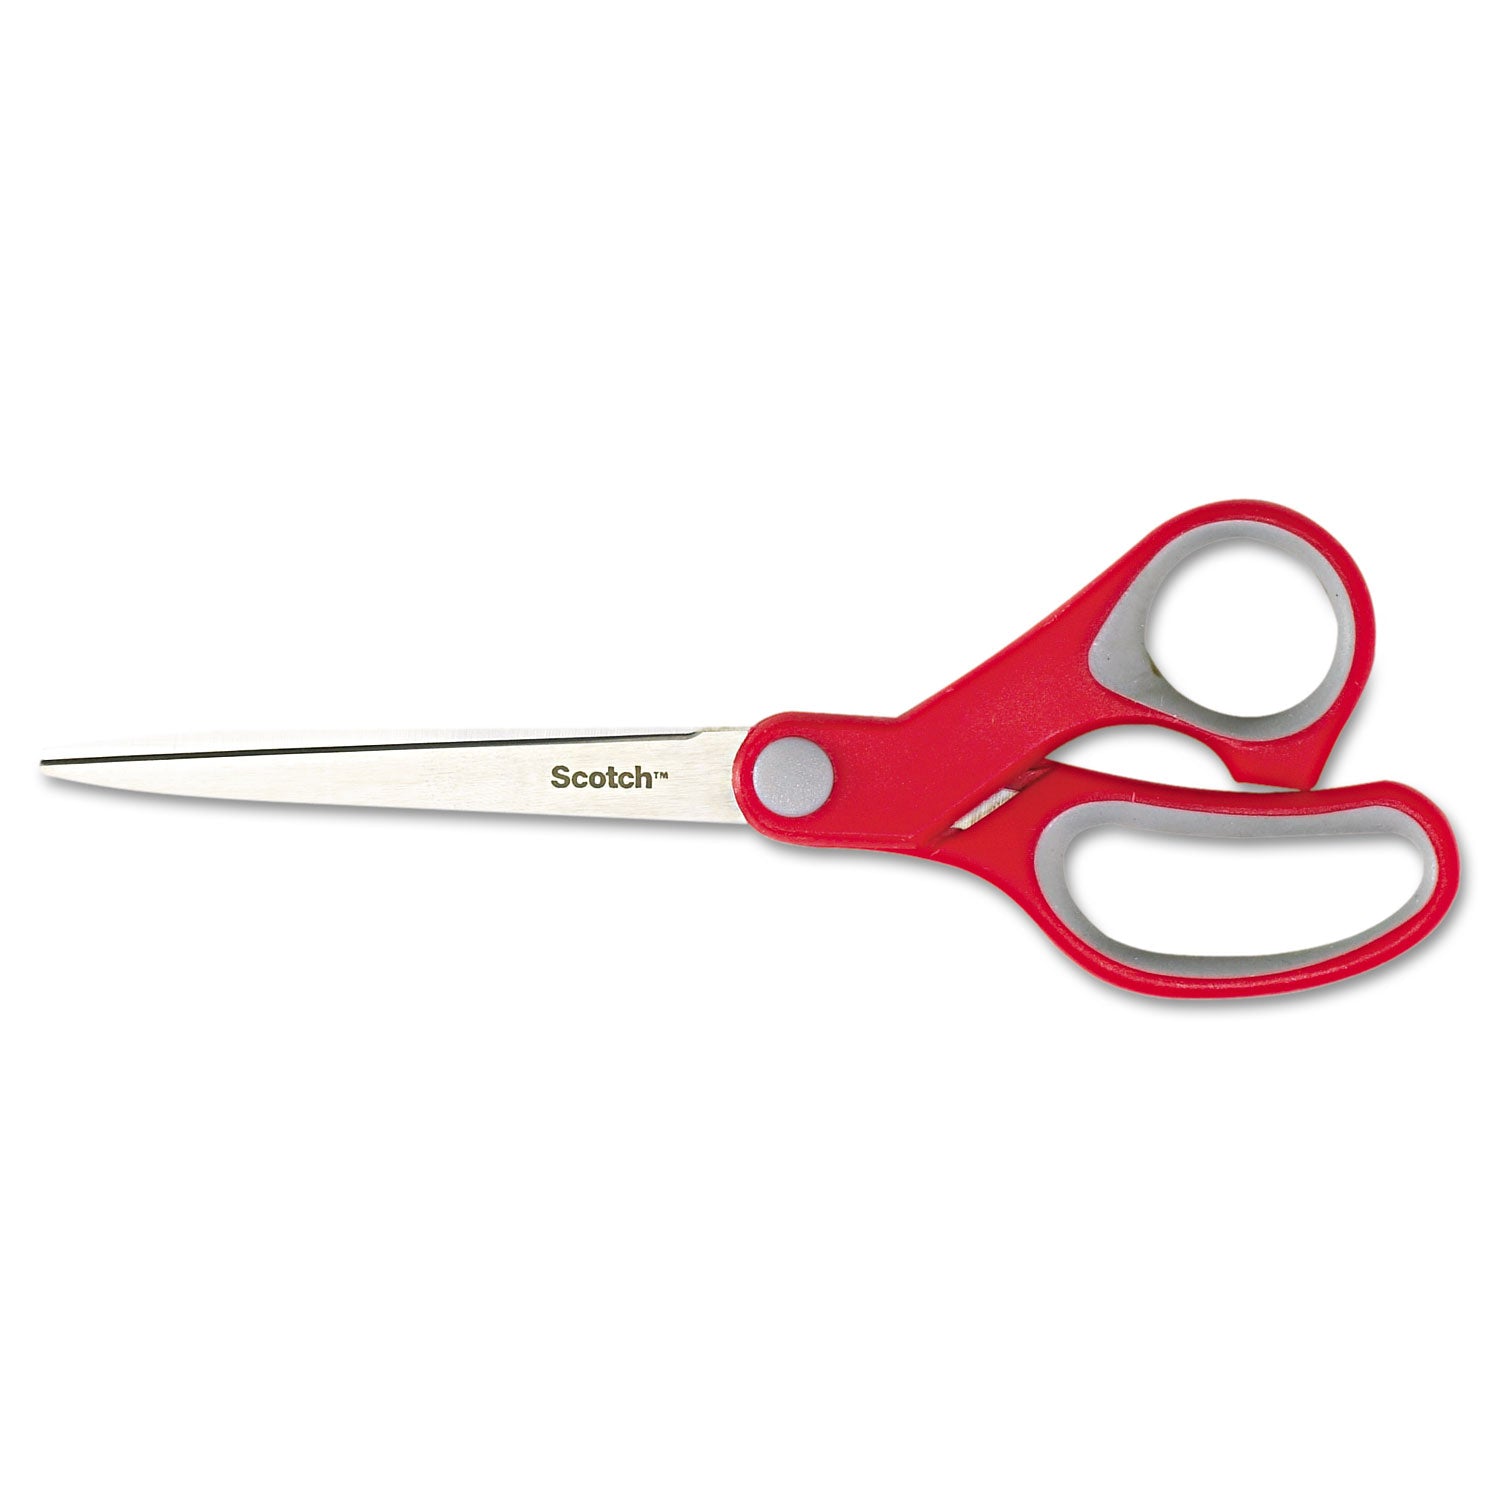 Multi-Purpose Scissors, Pointed Tip, 7" Long, 3.38" Cut Length, Gray/Red Straight Handle - 